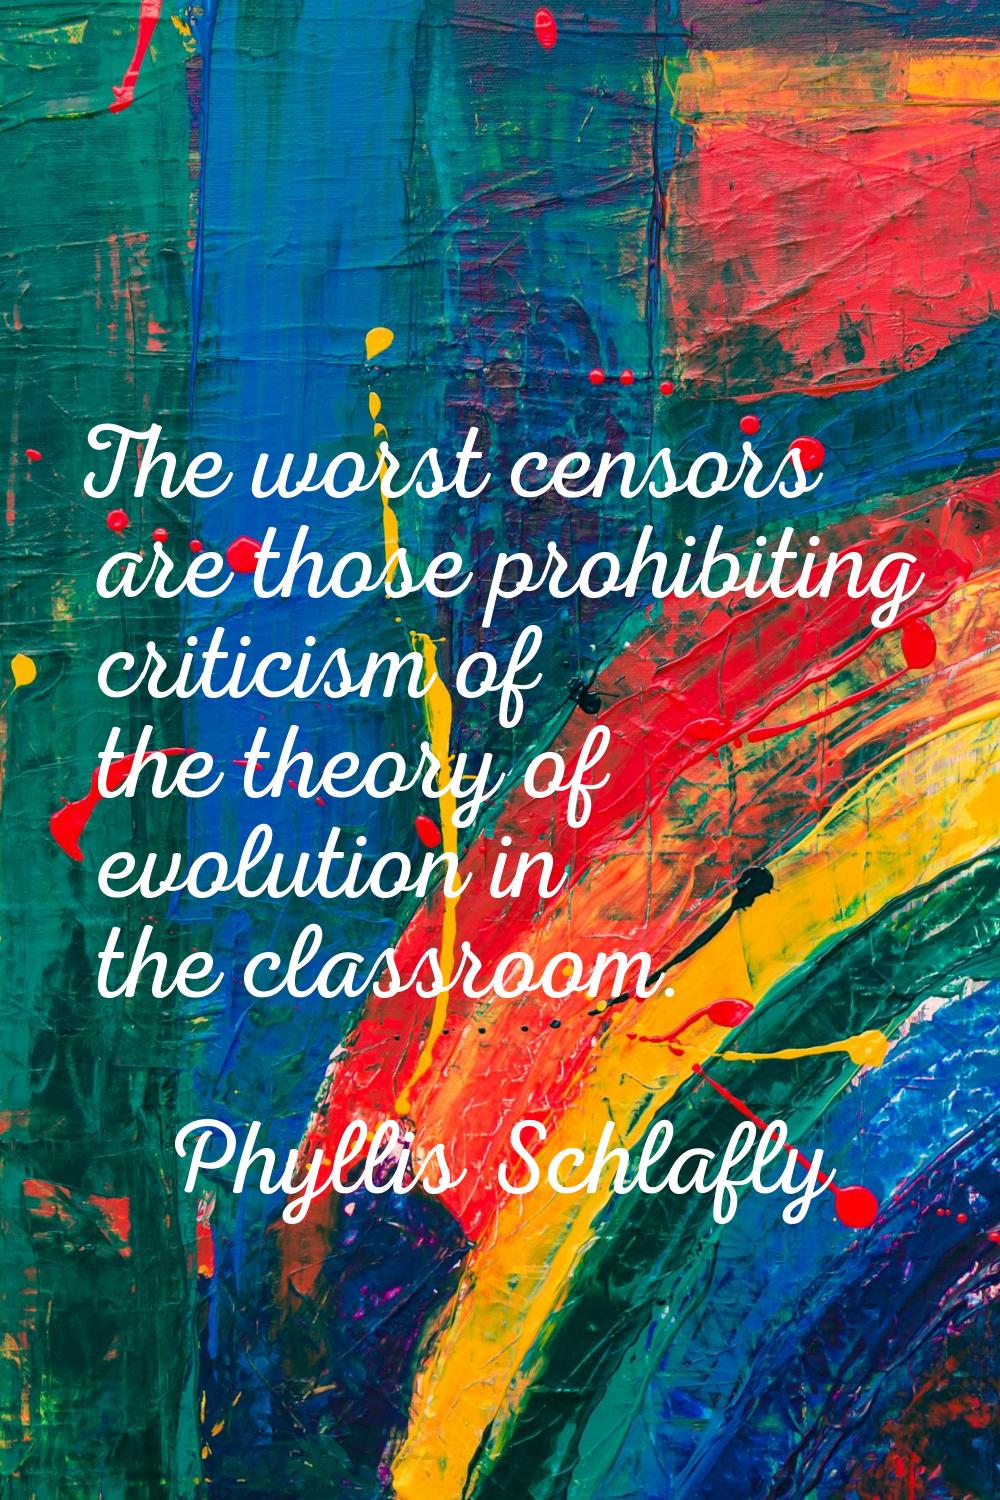 The worst censors are those prohibiting criticism of the theory of evolution in the classroom.